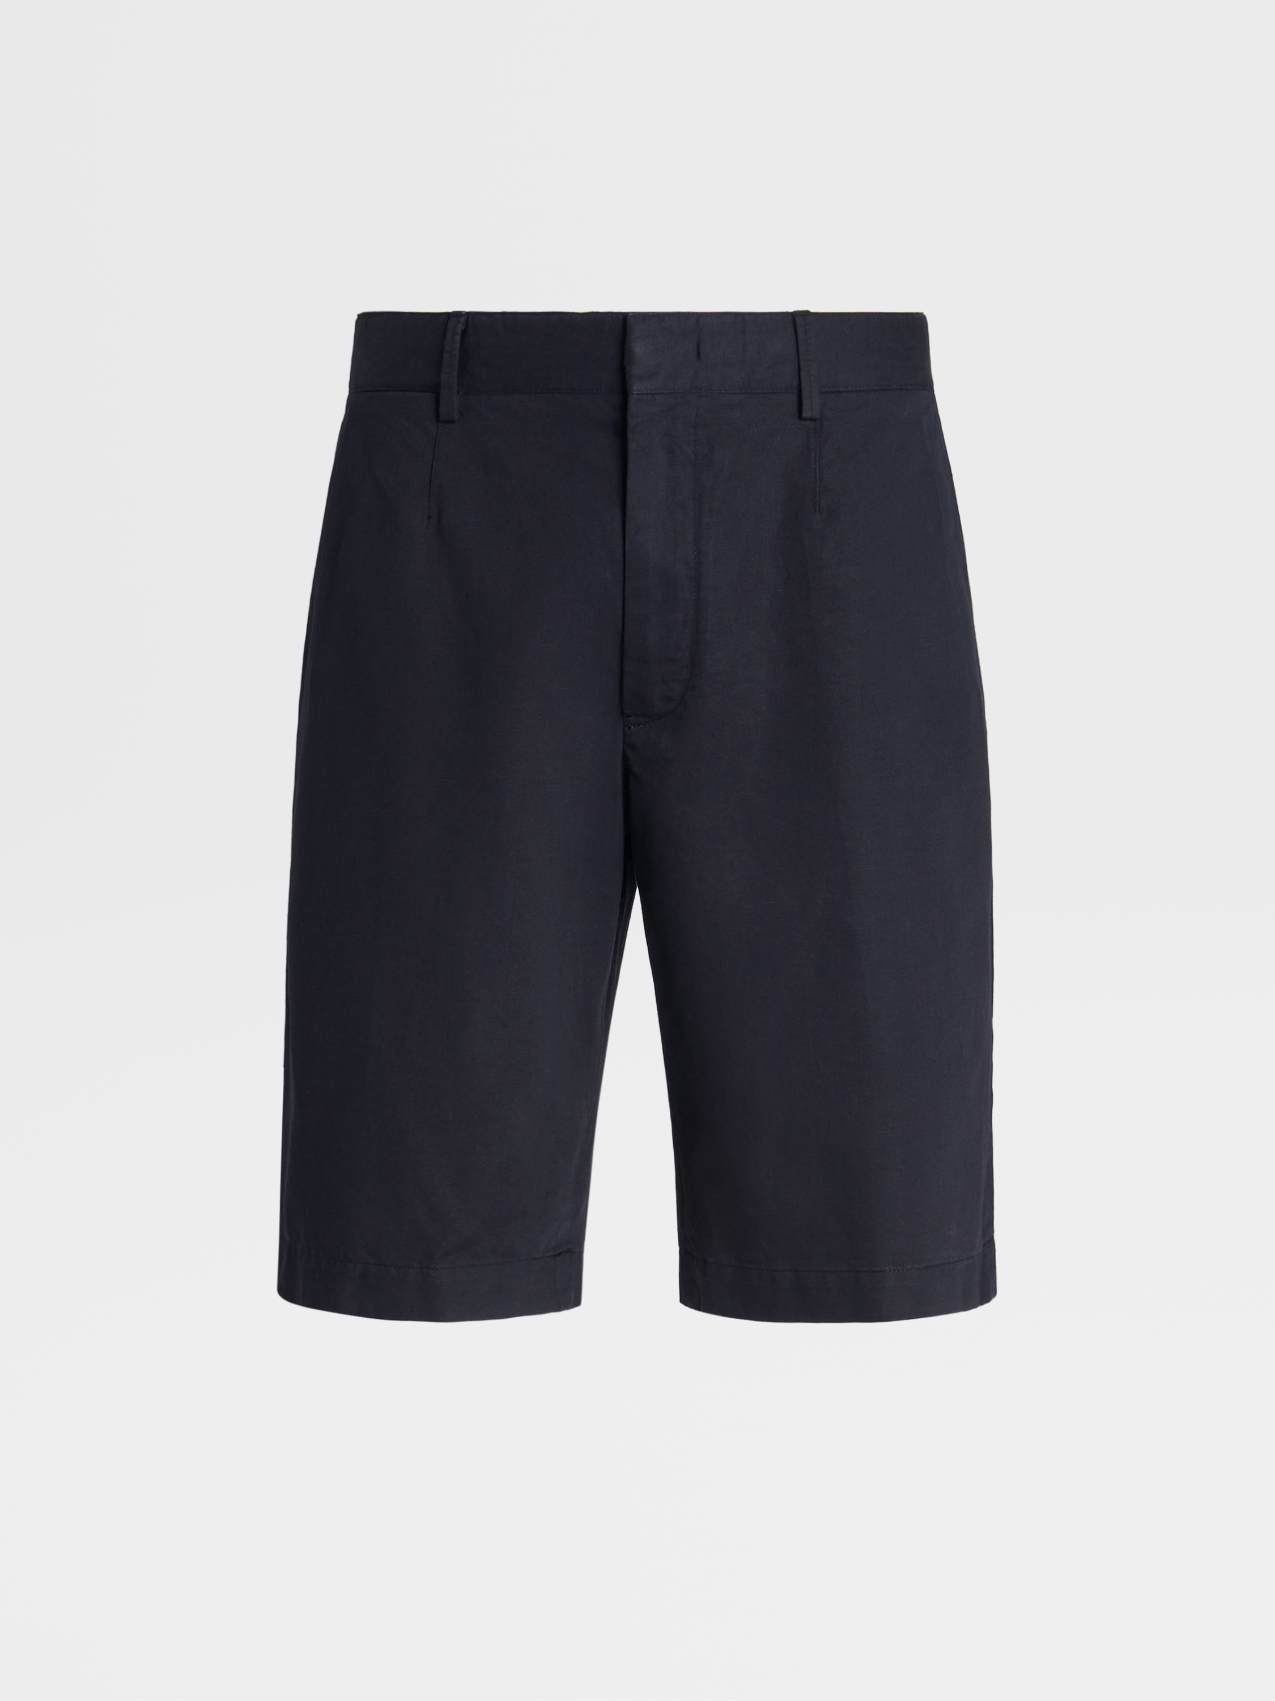 Navy Blue Cotton and Linen Summer Chino Shorts